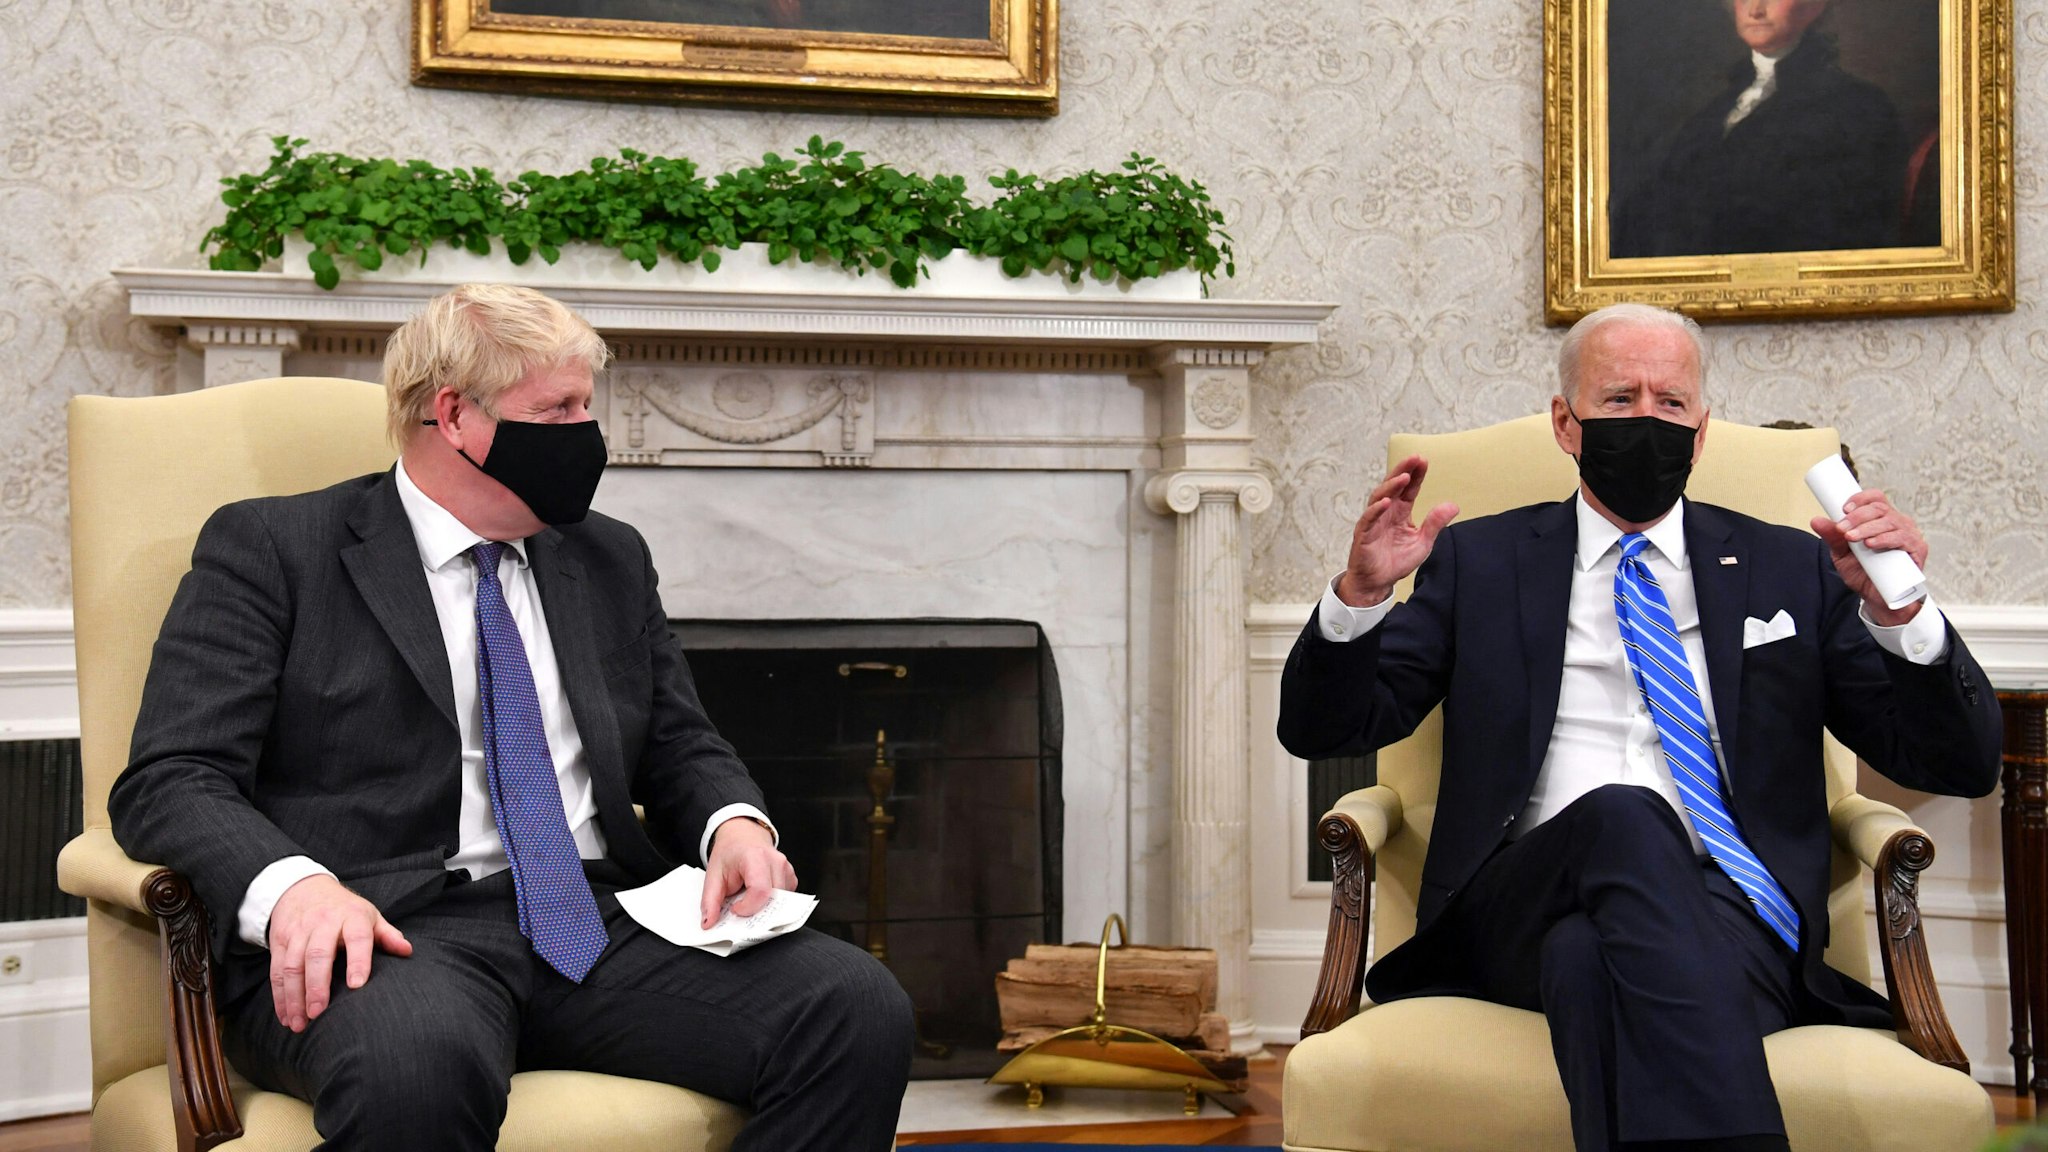 US President Joe Biden (R) holds a bilateral meeting with Britain's Prime Minister Boris Johnson at the Oval Office of the White House in Washington, DC on September 21, 2021.